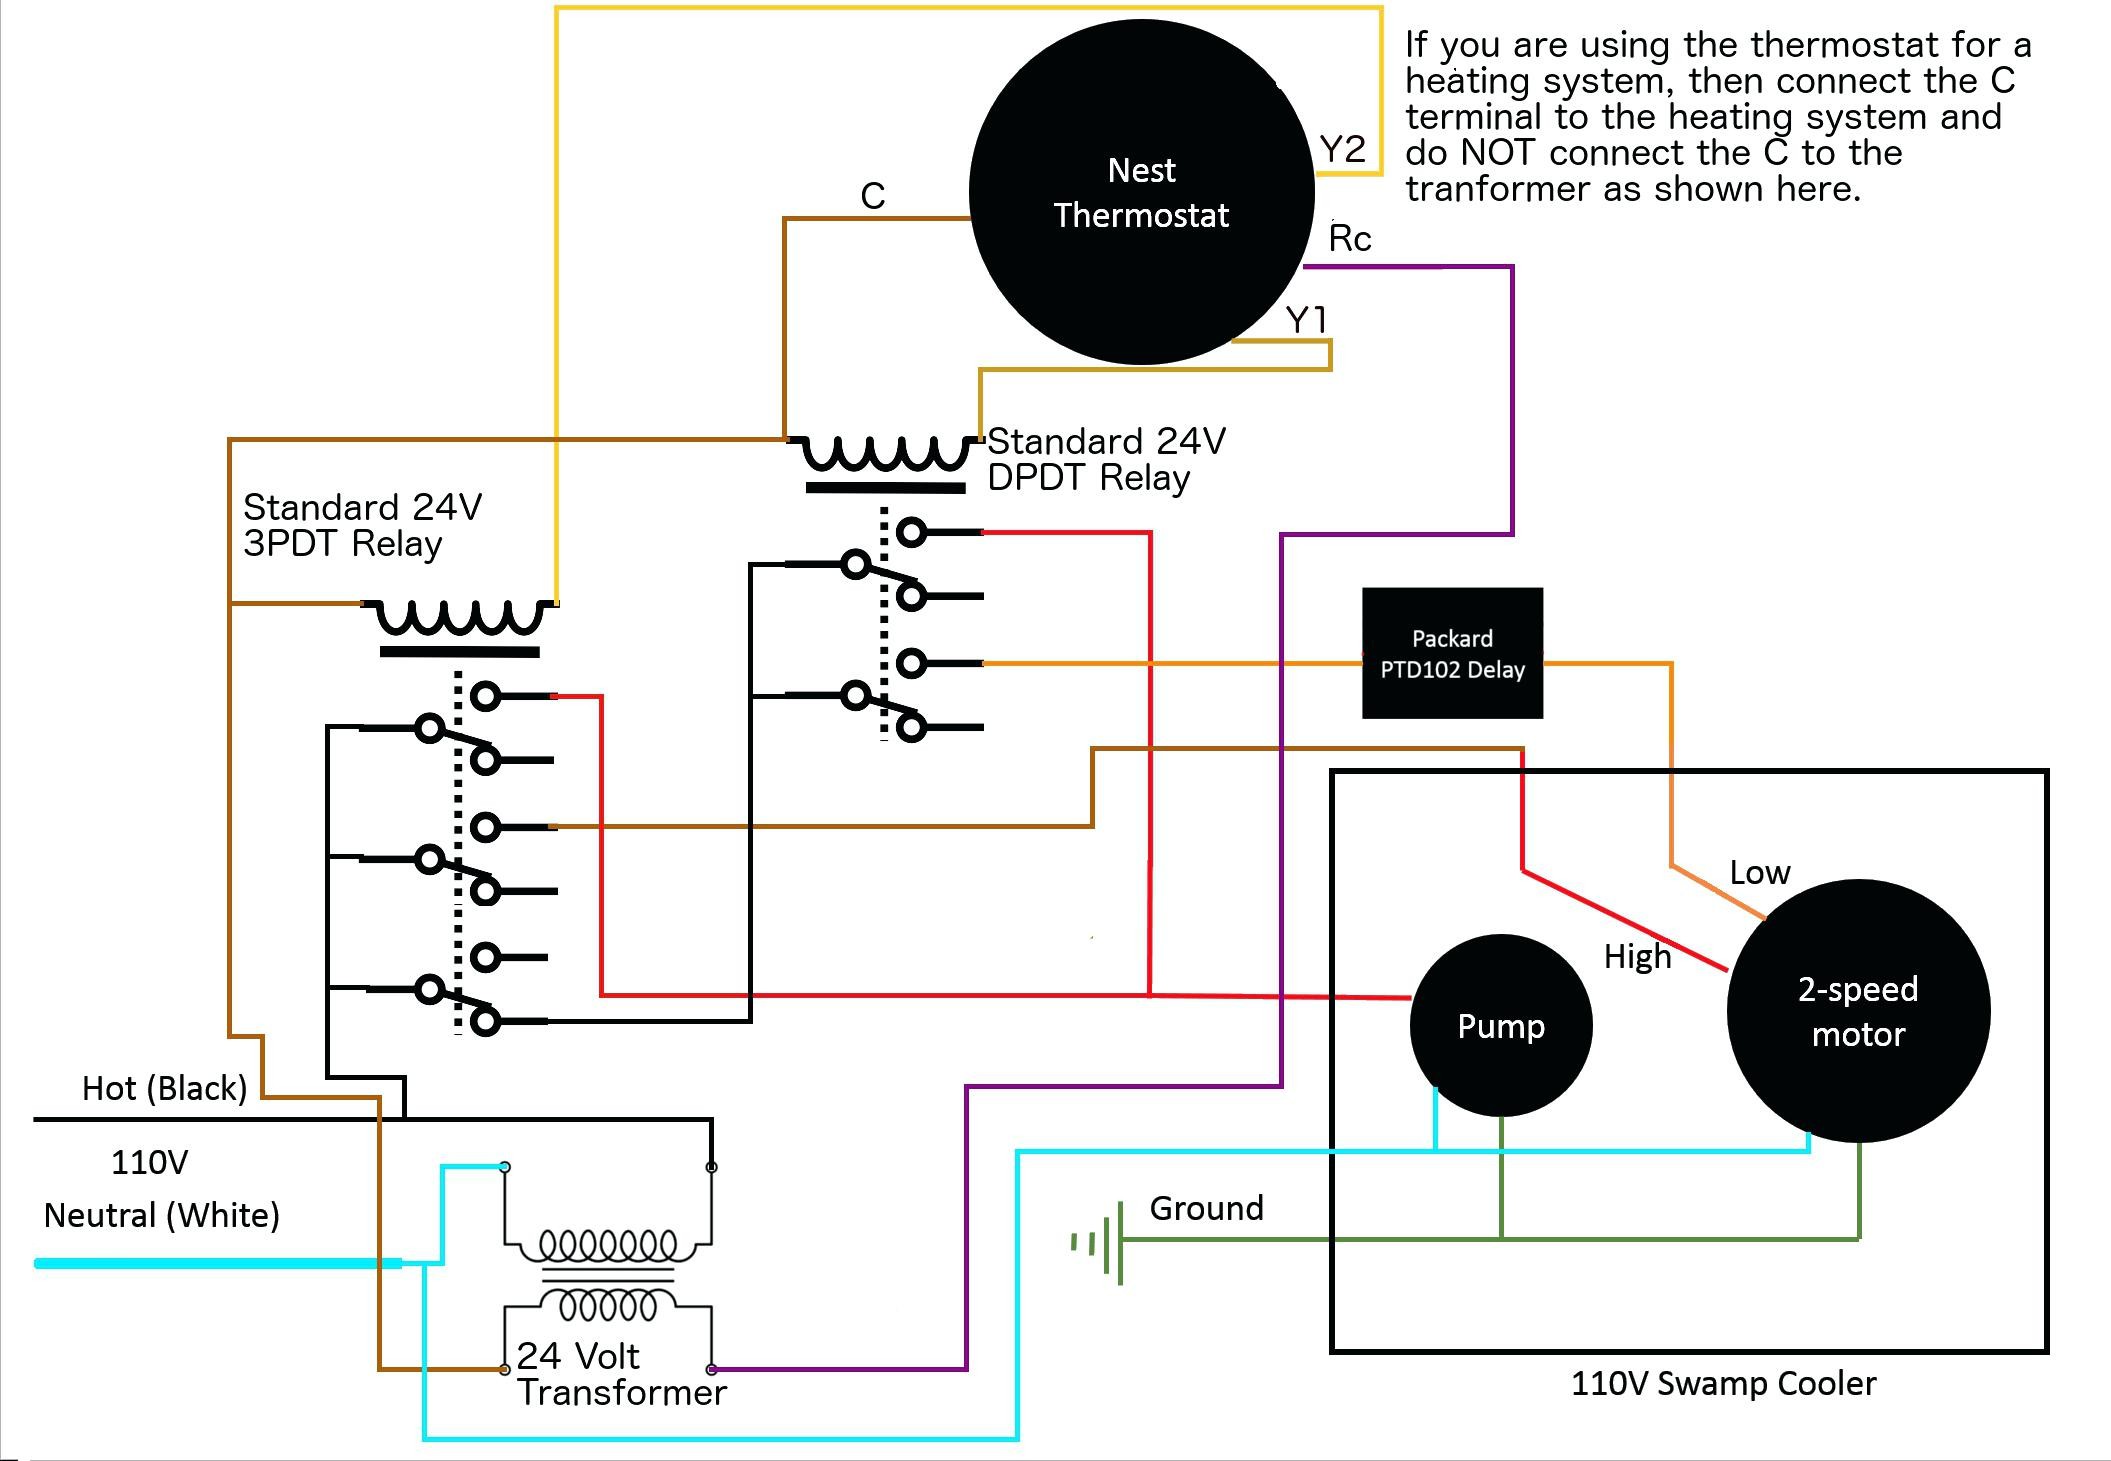 Full Size of Water Pump Control Box Wiring Diagram Controlling Swamp Cooler Using Nest Thermostat Well